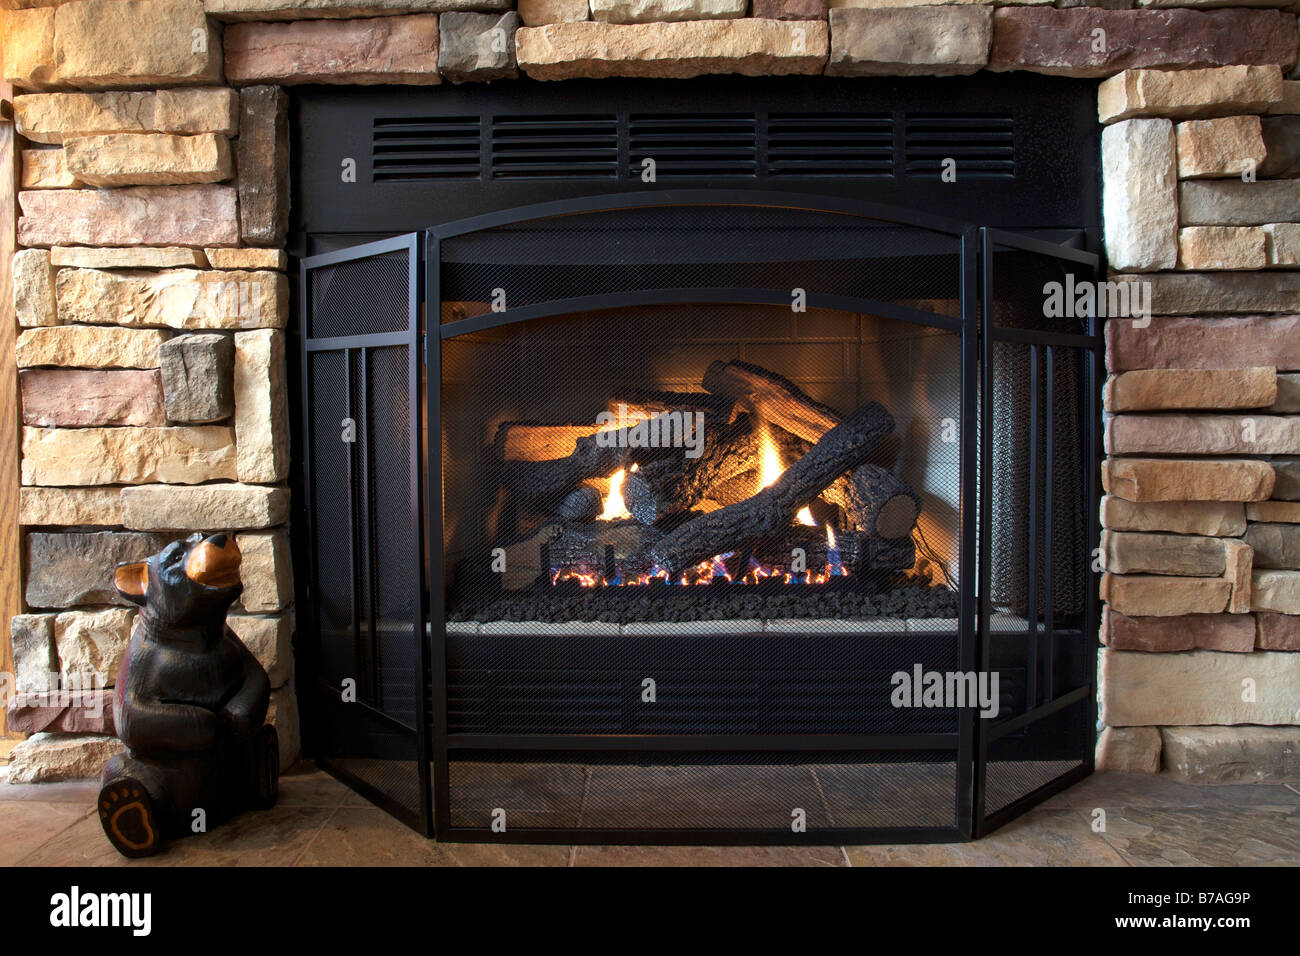 A gas log fireplace provides both emotional and physical warmth as the afternoon sun streams in on a cold winter day Stock Photo